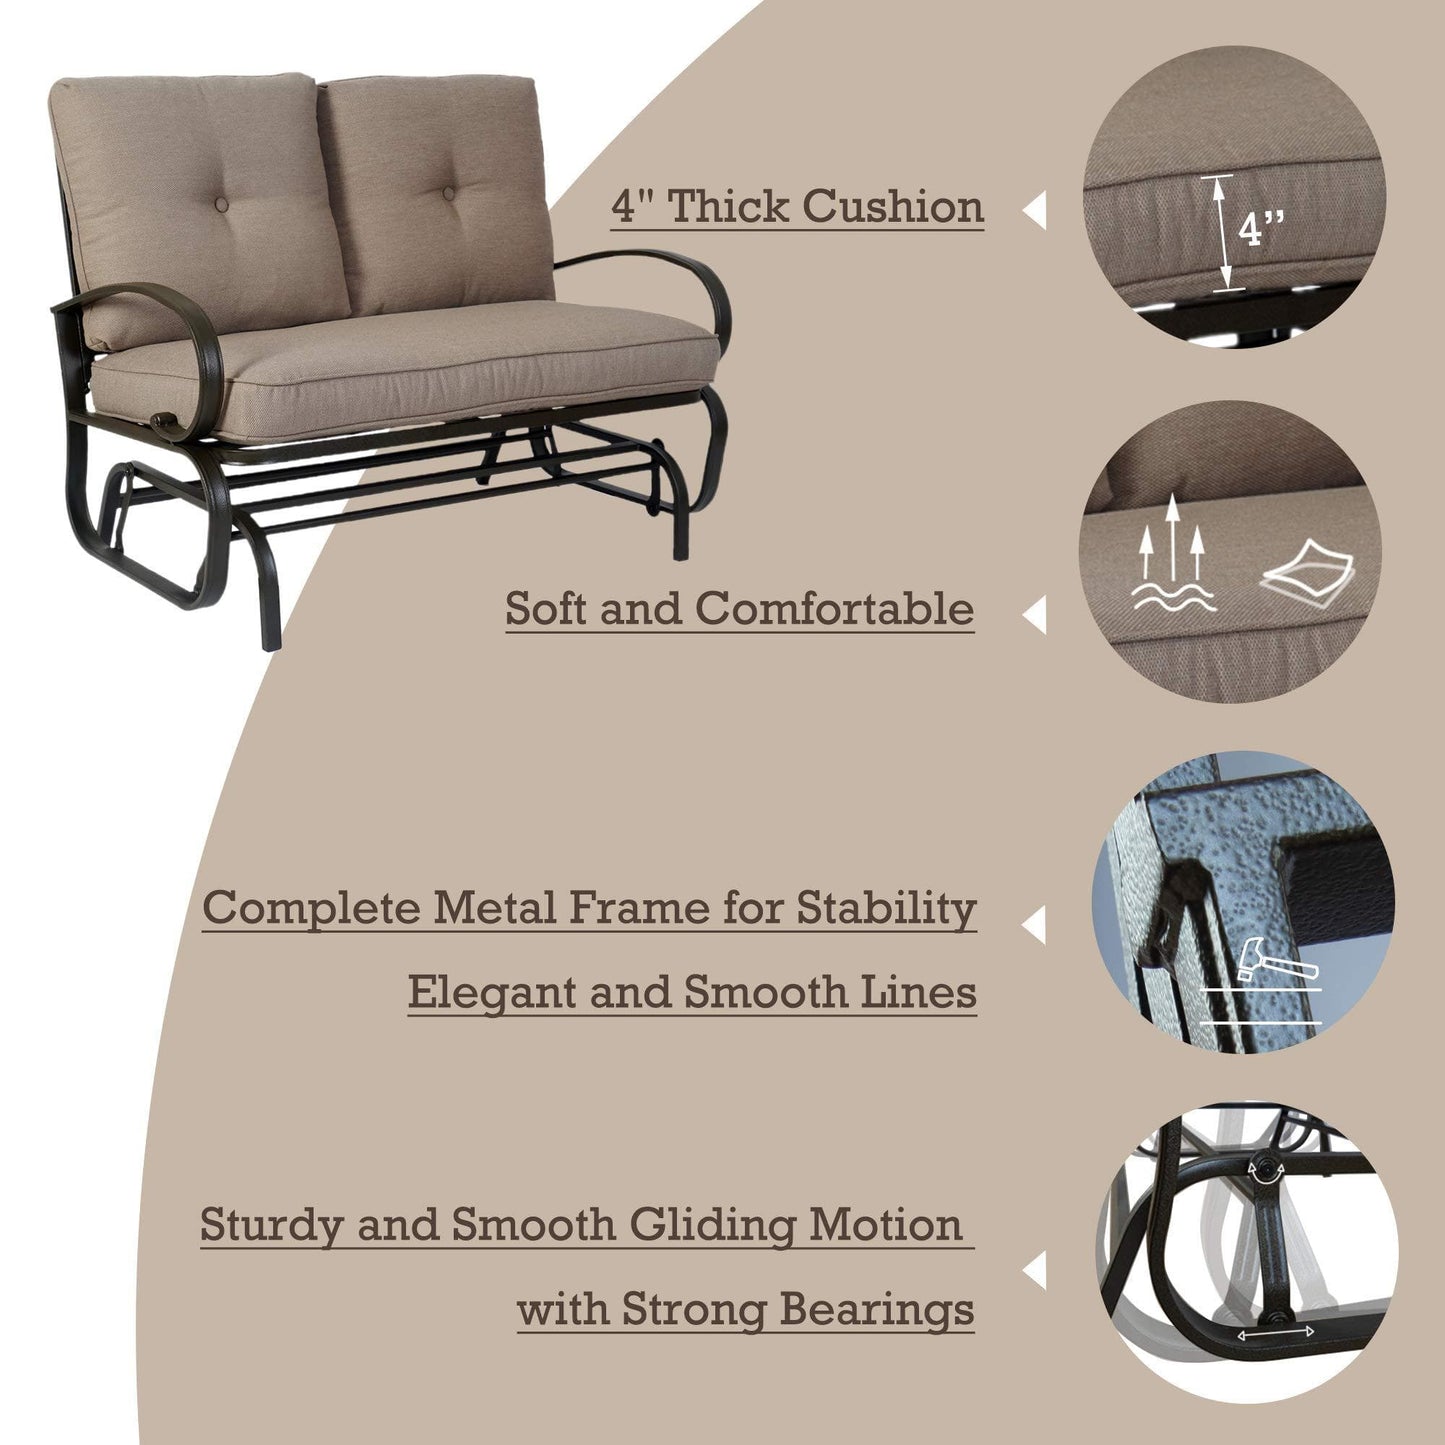 SONOMA GOODS FOR LIFE™ Furniture Grey SONOMA GOODS FOR LIFE™ - Loveseat Outdoor Patio Rocking 2 Seats Steel Frame Furniture